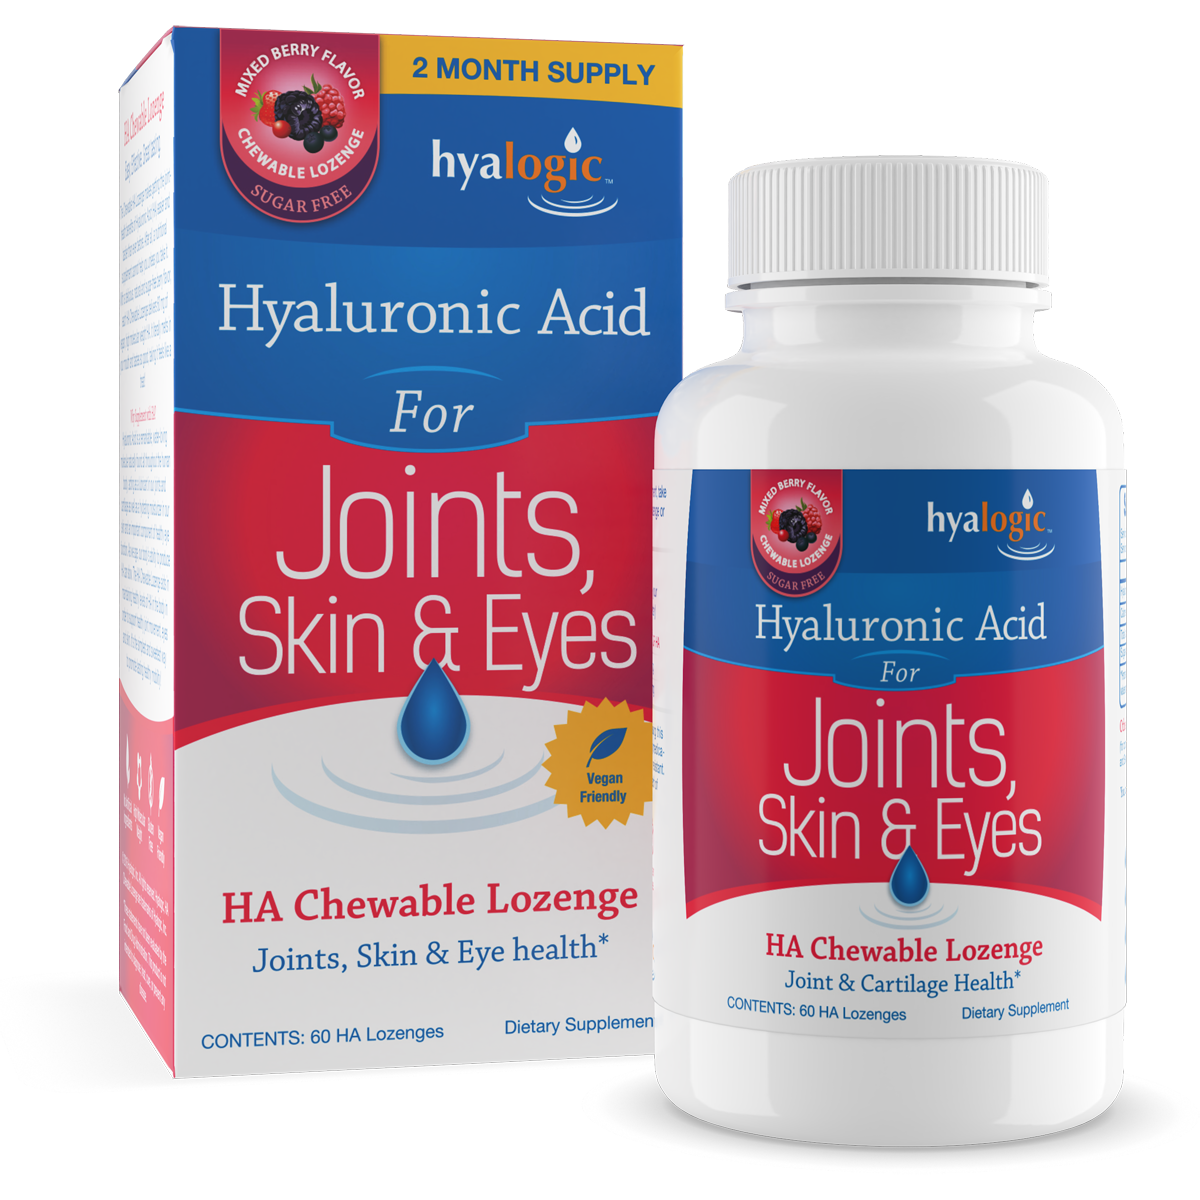 HA Chewable 60 lozenges by Hyalogic